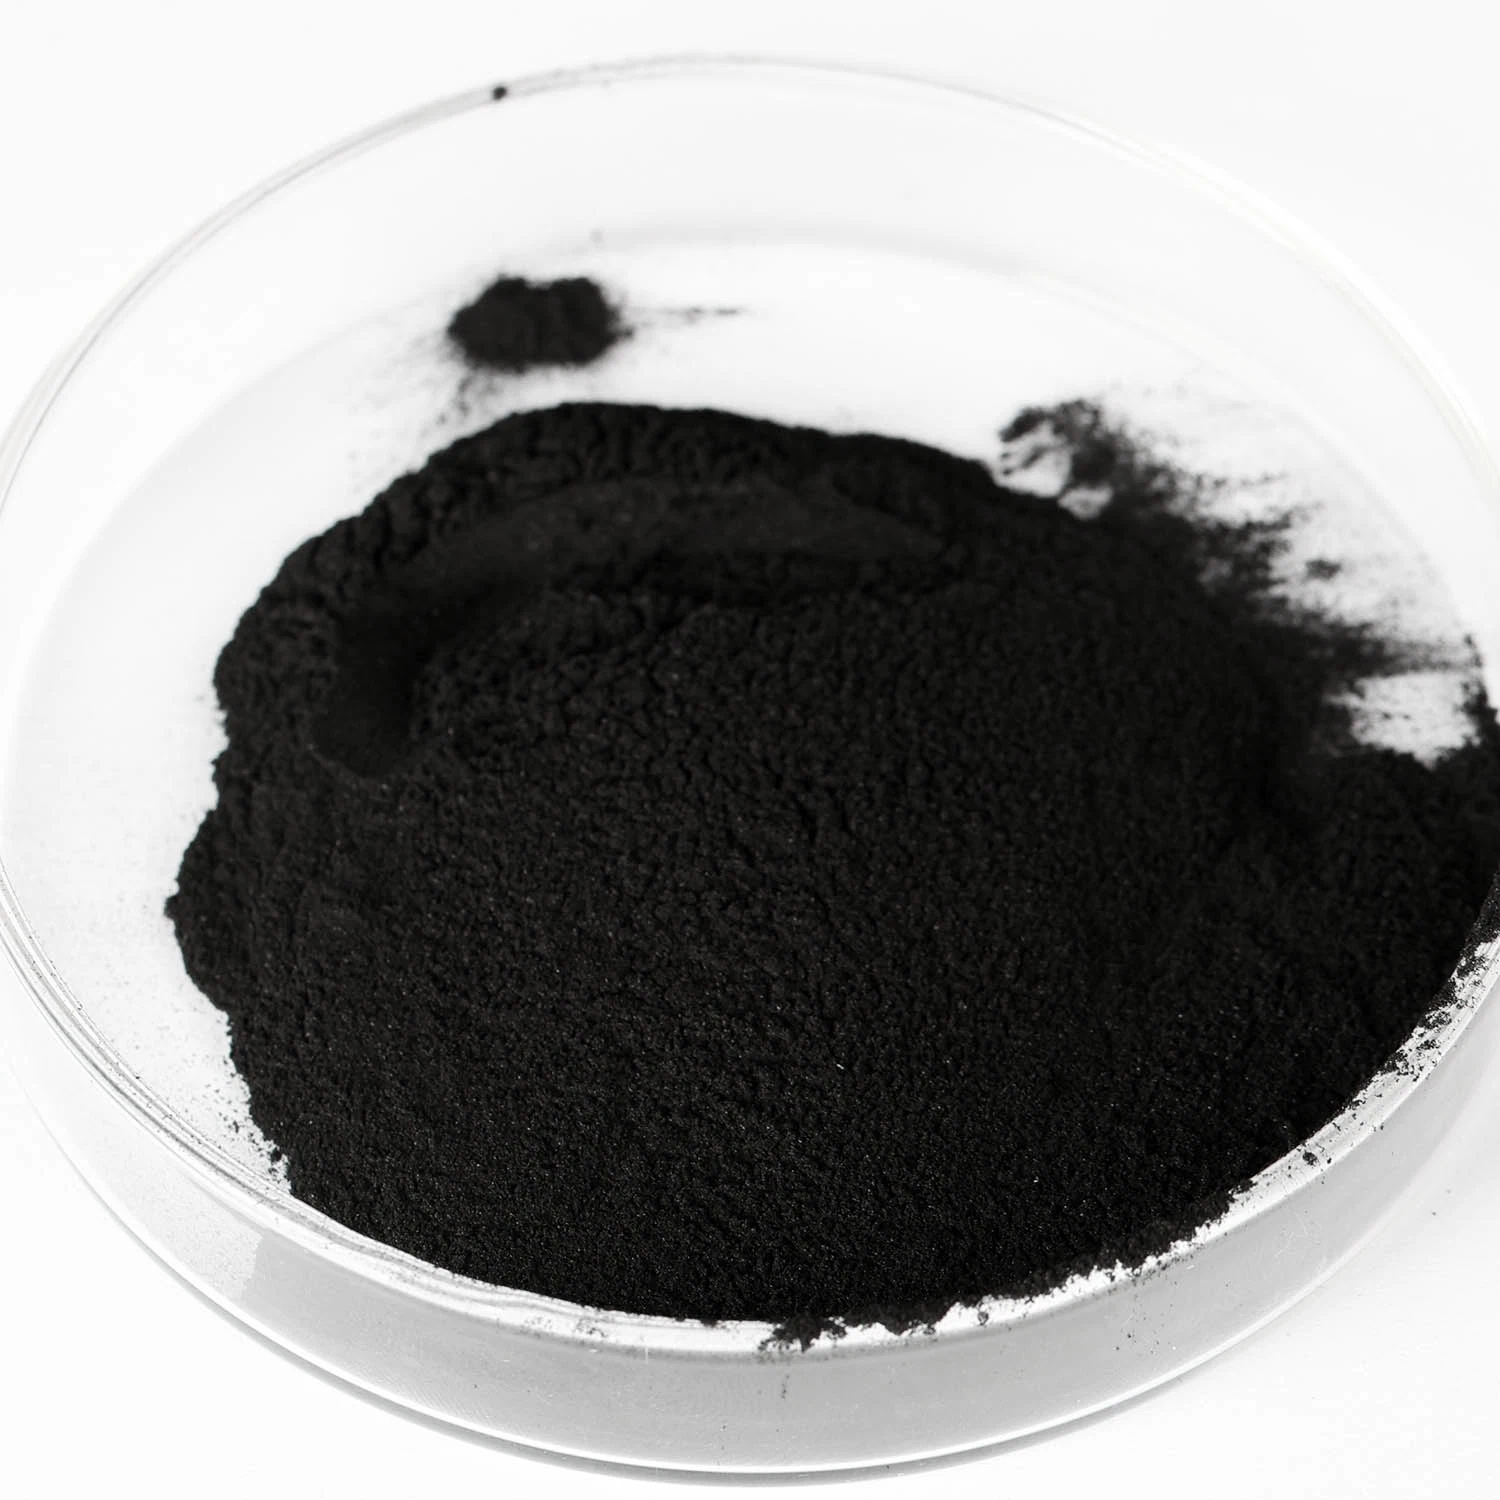 Wood Powder Activated Carbon That Has More Than 210 Mg/G Methylene Blue Adsorption Value